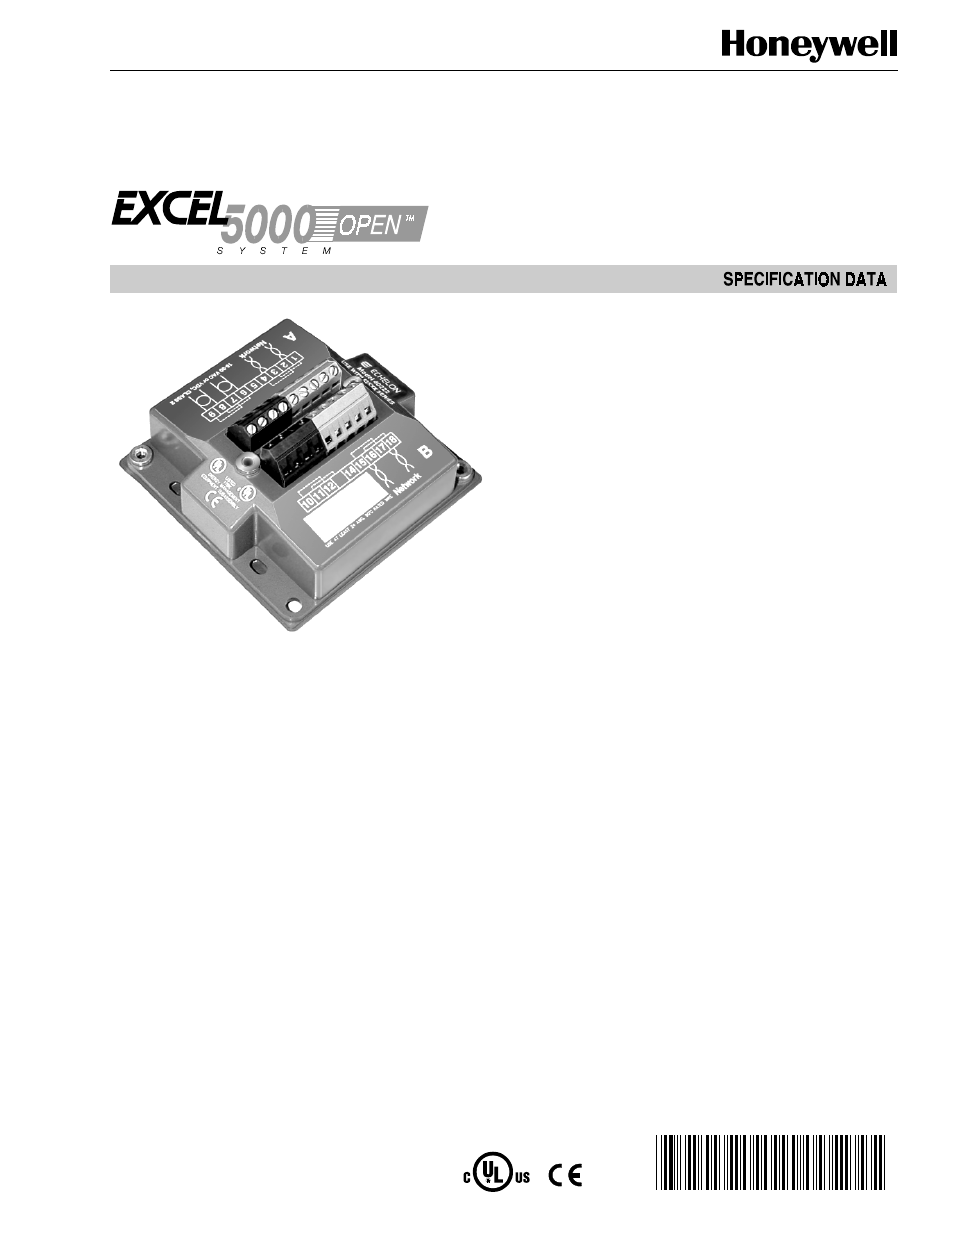 Honeywell EXCEL5000 Q7751A User Manual | 2 pages